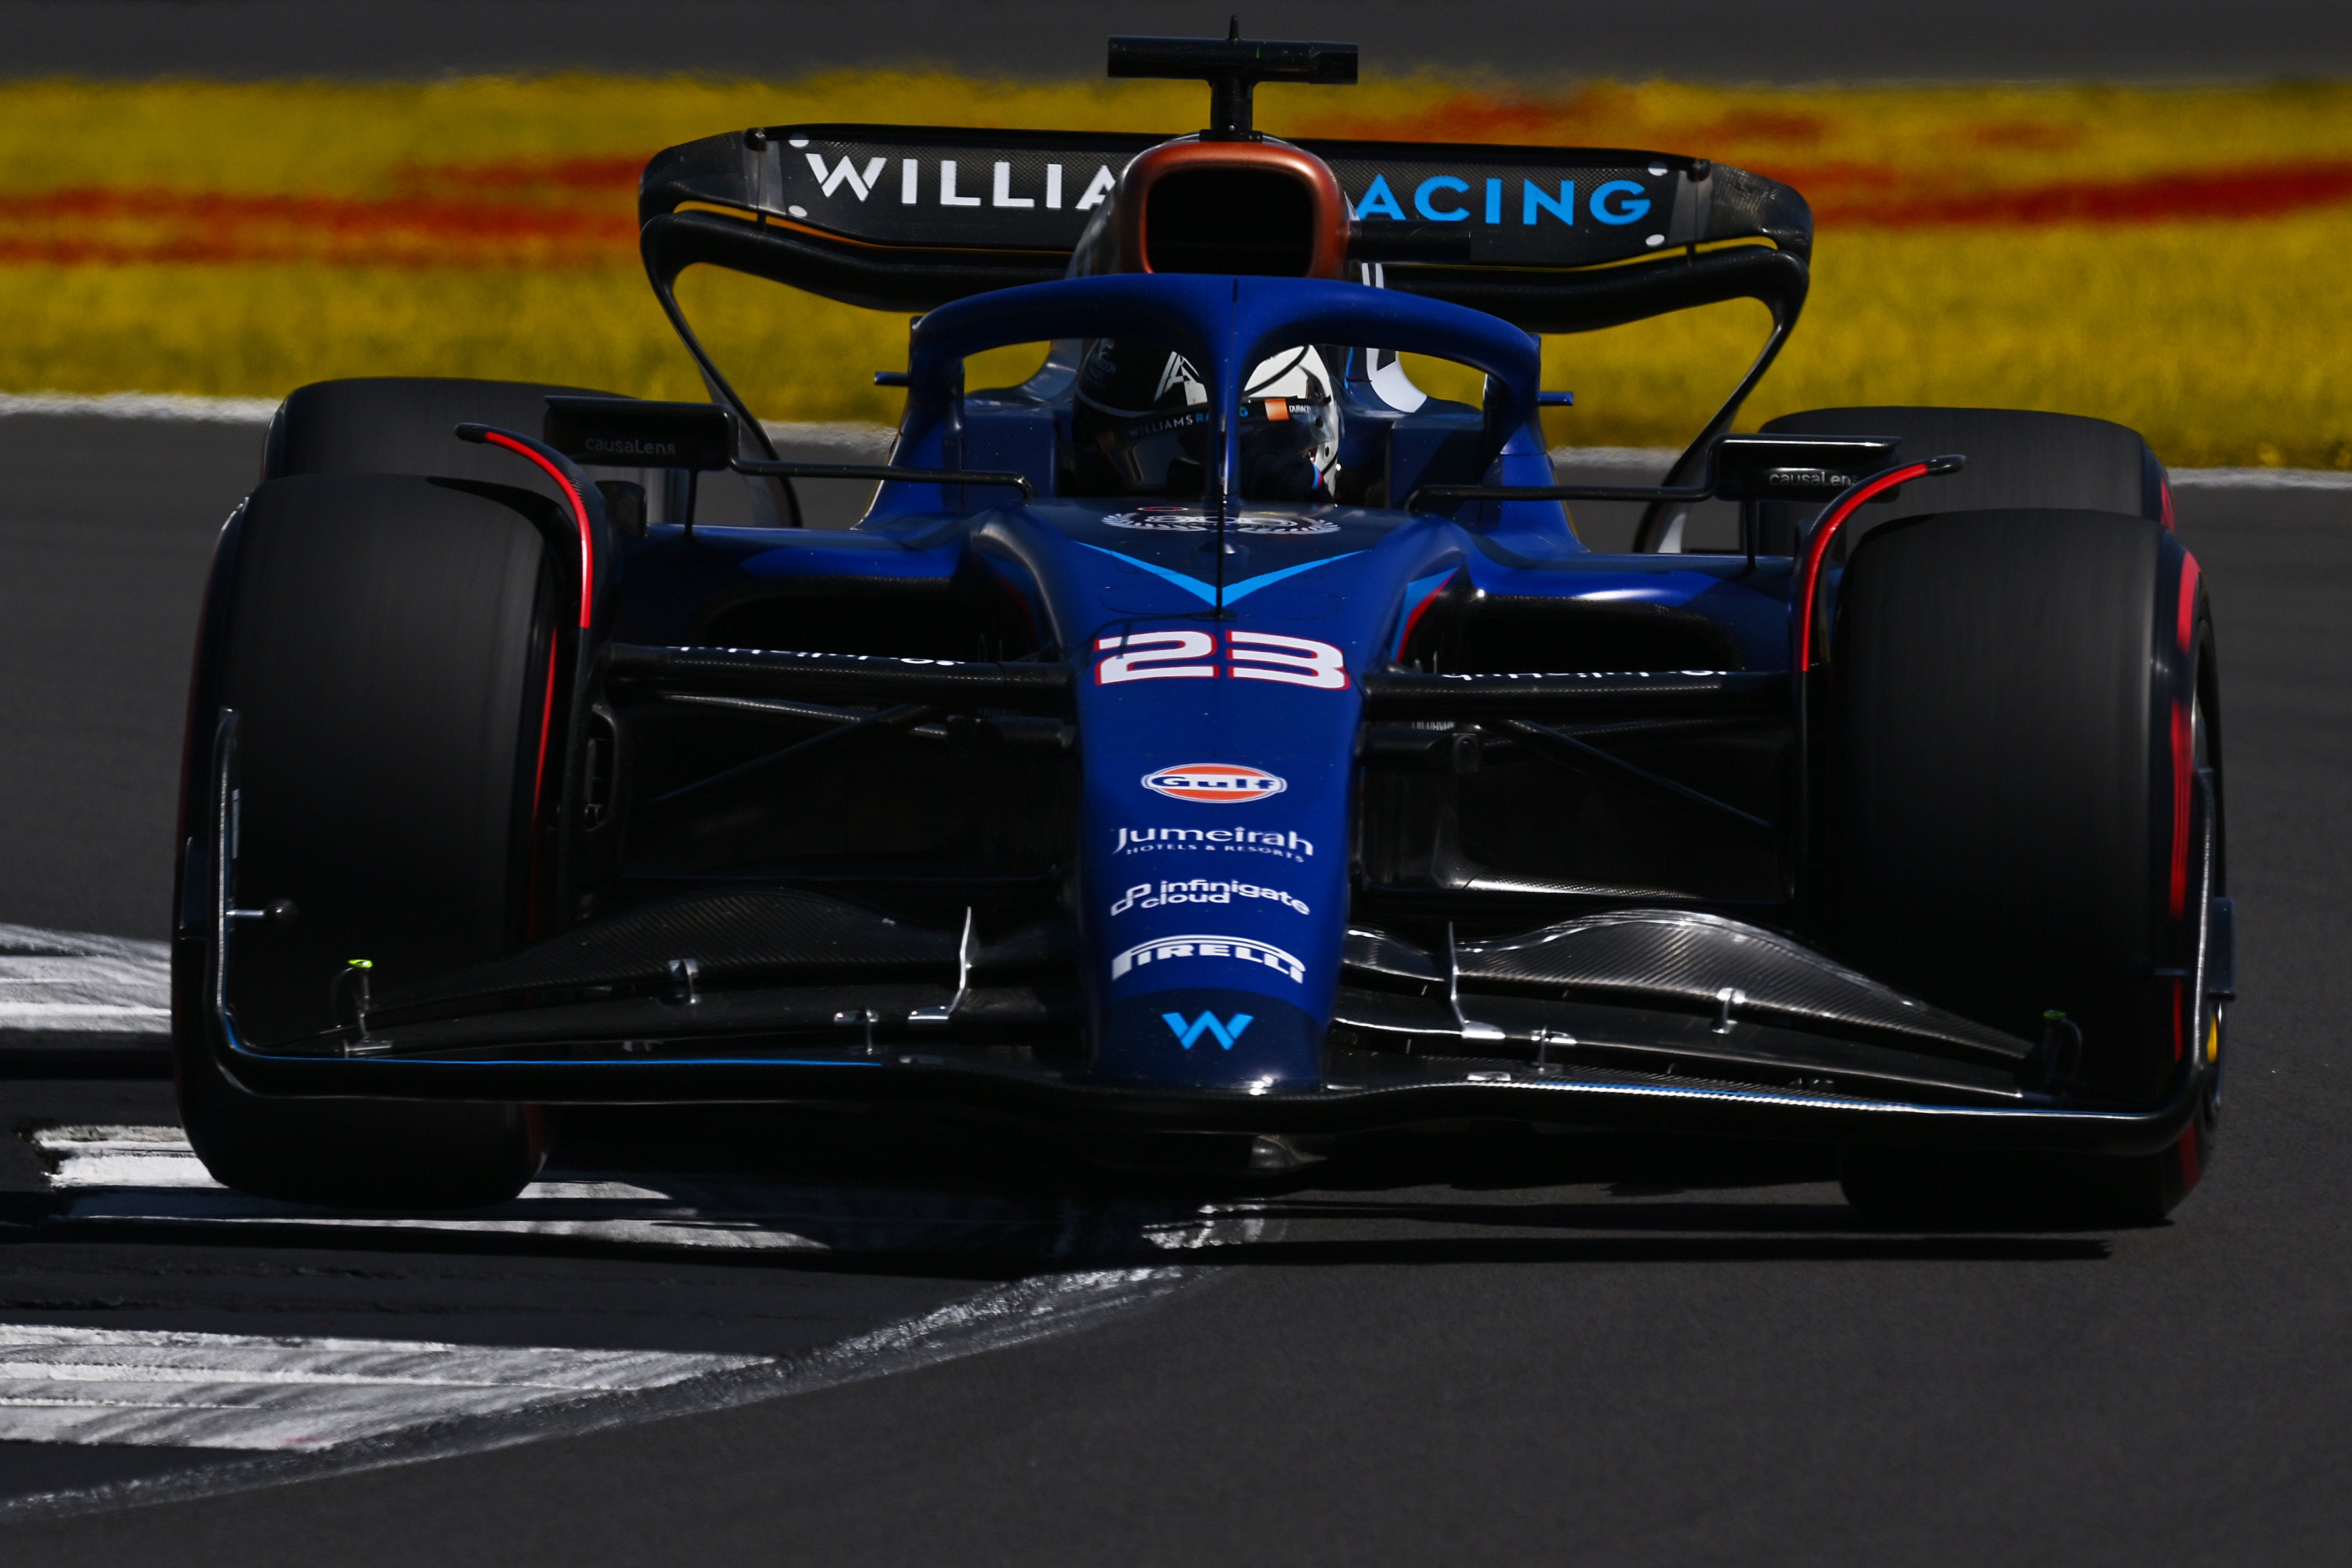 Alex Albon impressed for Williams in practice on Friday